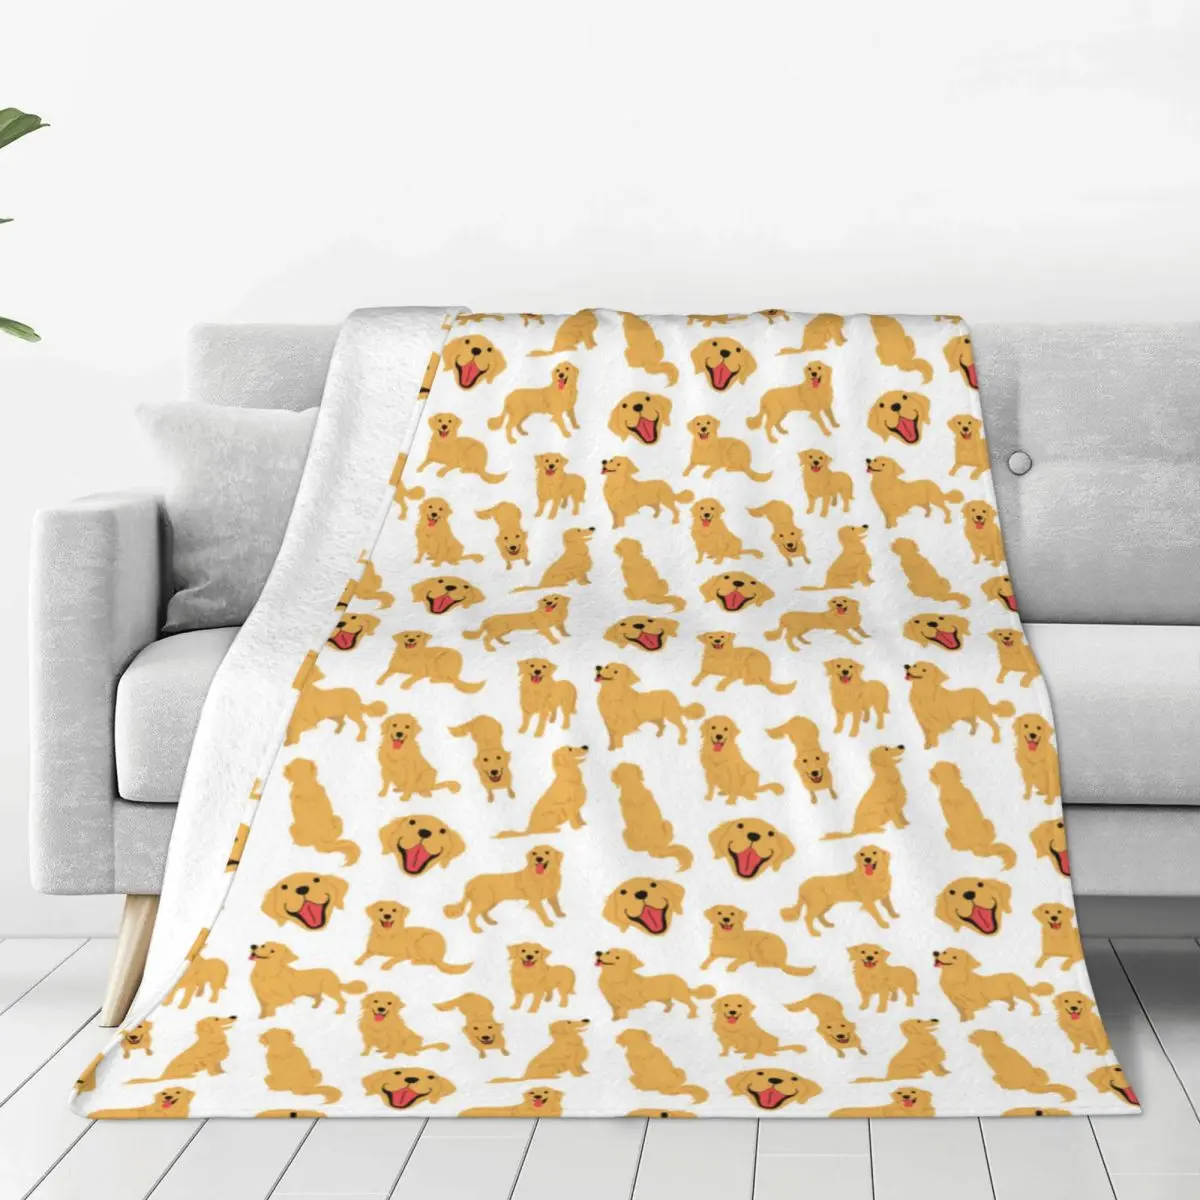 

Golden Retriever Soft Fleece Throw Blanket Warm and Cozy for All Seasons Comfy Microfiber Blanket for Couch Sofa Bed 40"x30"